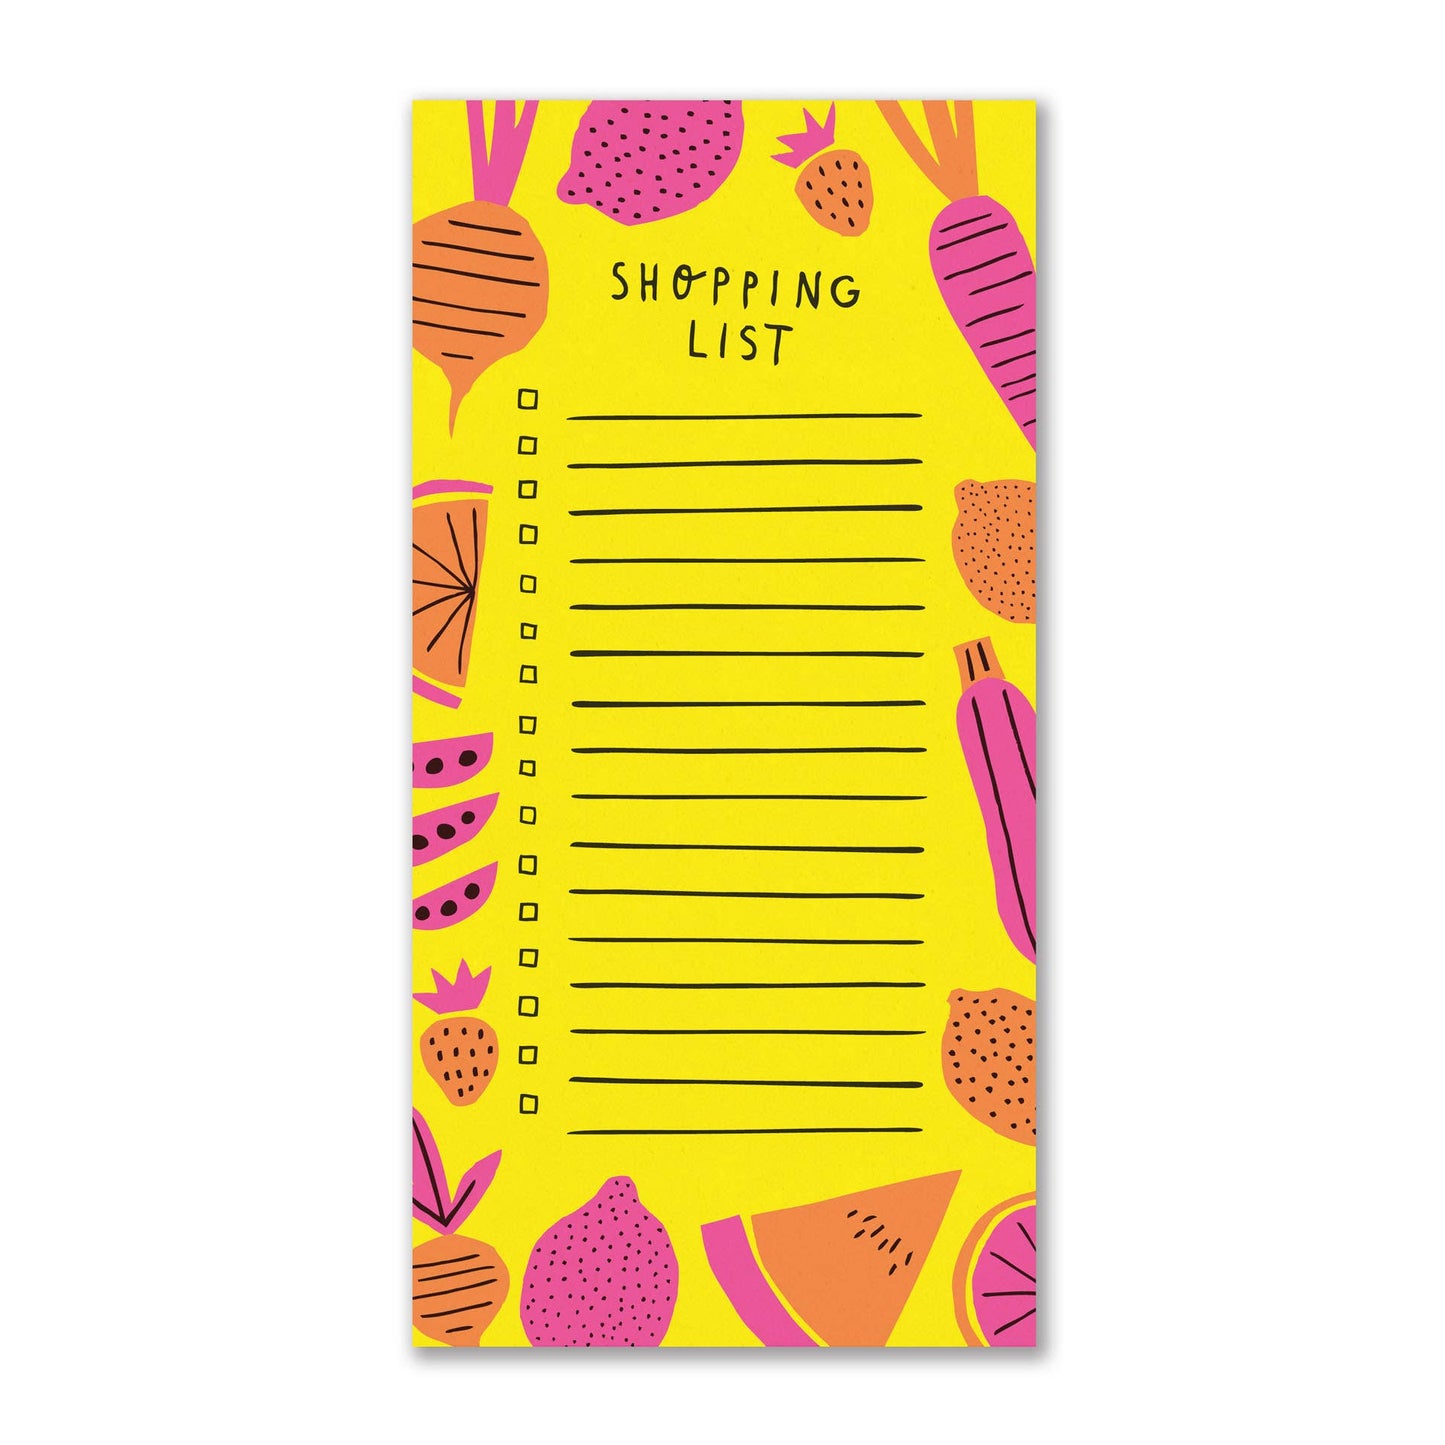 Yellow shopping list notepad that has various fruits and vegetables in pink and orange, along the edge of the pad. In the middle of the pad it reads "shopping list" and has a check box and line for up to 16 items